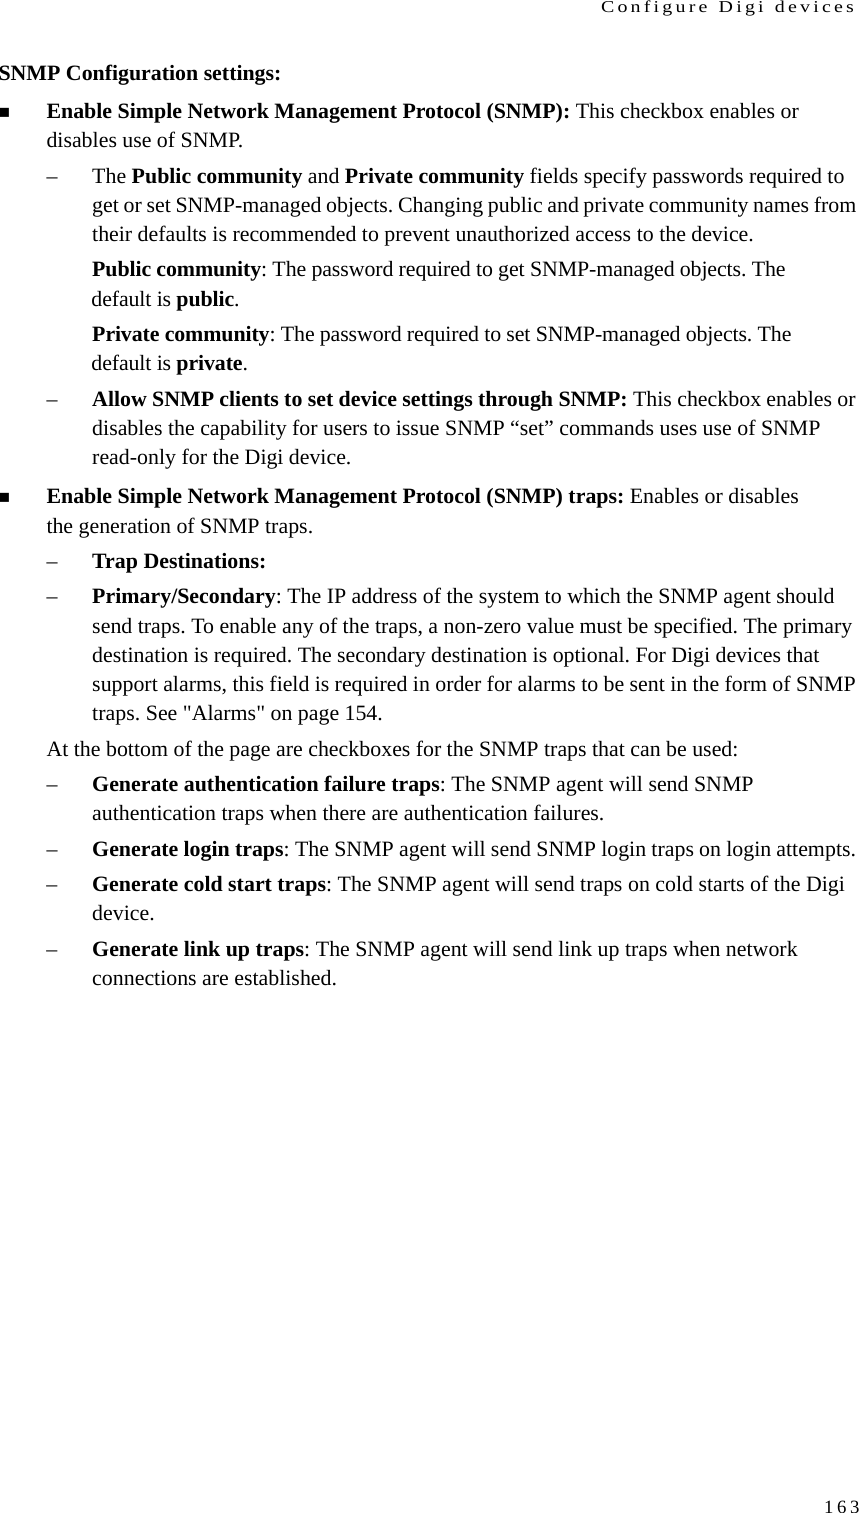 Configure Digi devices163SNMP Configuration settings:Enable Simple Network Management Protocol (SNMP): This checkbox enables or disables use of SNMP. –The Public community and Private community fields specify passwords required to get or set SNMP-managed objects. Changing public and private community names from their defaults is recommended to prevent unauthorized access to the device.Public community: The password required to get SNMP-managed objects. The default is public.Private community: The password required to set SNMP-managed objects. The default is private.–Allow SNMP clients to set device settings through SNMP: This checkbox enables or disables the capability for users to issue SNMP “set” commands uses use of SNMP read-only for the Digi device.Enable Simple Network Management Protocol (SNMP) traps: Enables or disables the generation of SNMP traps.–Trap Destinations: –Primary/Secondary: The IP address of the system to which the SNMP agent should send traps. To enable any of the traps, a non-zero value must be specified. The primary destination is required. The secondary destination is optional. For Digi devices that support alarms, this field is required in order for alarms to be sent in the form of SNMP traps. See &quot;Alarms&quot; on page 154.At the bottom of the page are checkboxes for the SNMP traps that can be used: –Generate authentication failure traps: The SNMP agent will send SNMP authentication traps when there are authentication failures. –Generate login traps: The SNMP agent will send SNMP login traps on login attempts. –Generate cold start traps: The SNMP agent will send traps on cold starts of the Digi device. –Generate link up traps: The SNMP agent will send link up traps when network connections are established. 